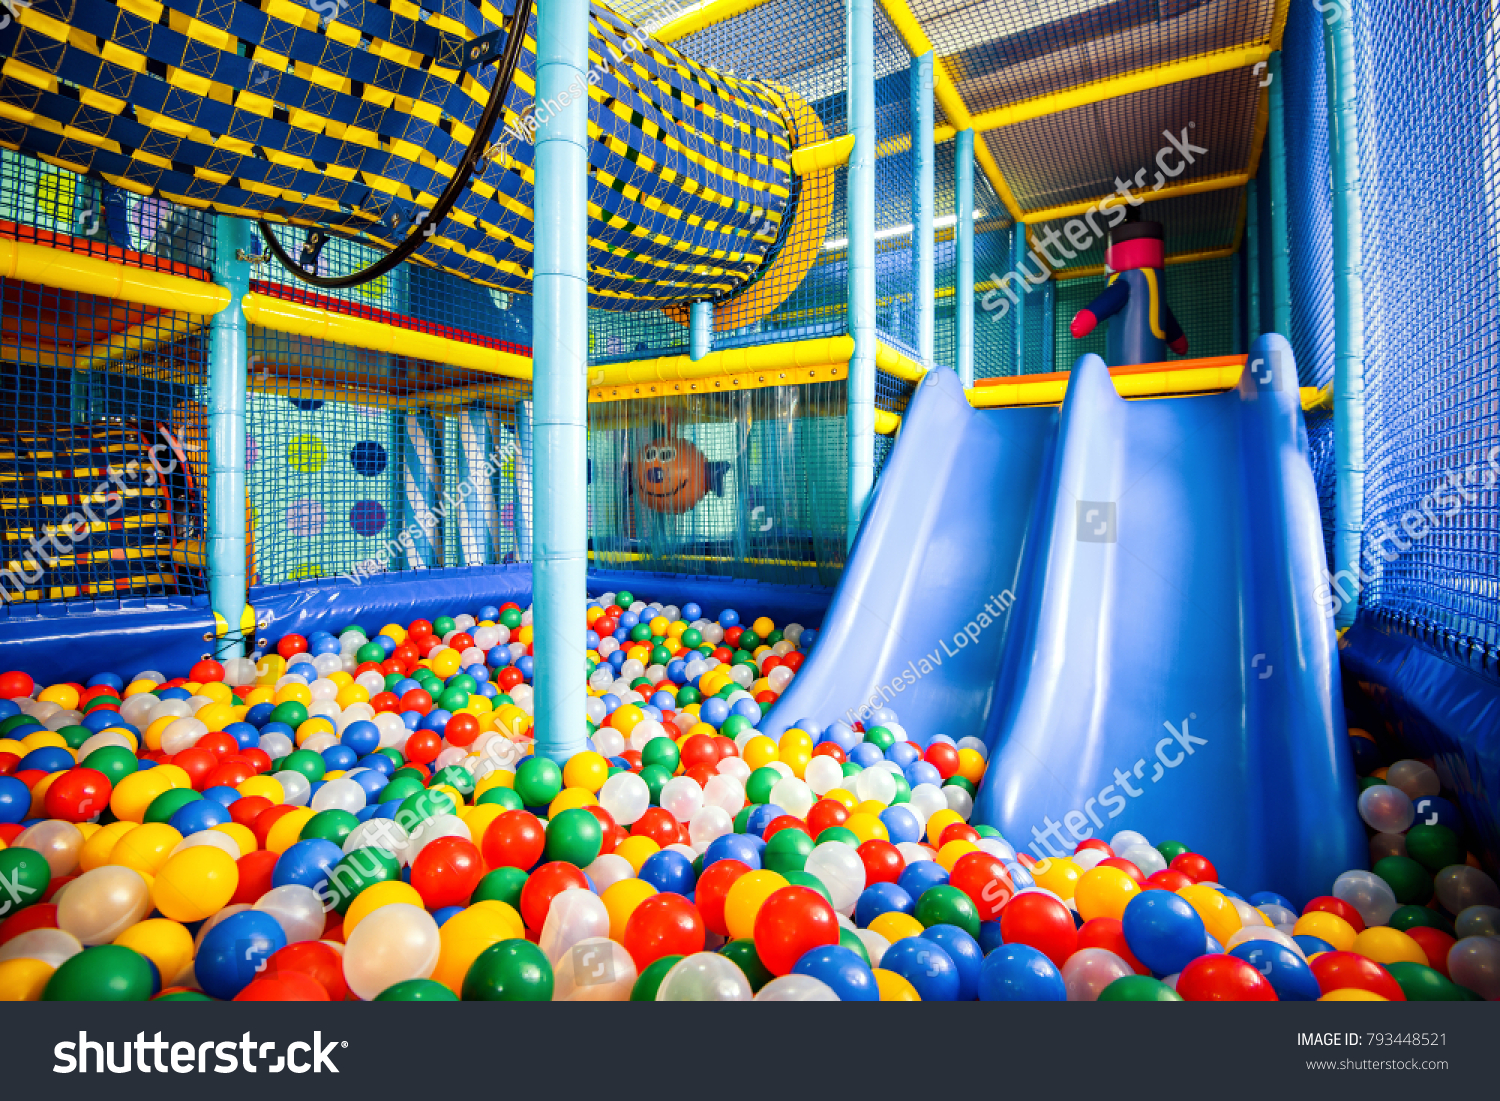 Kids playground indoor, inside big colorful plastic structure for active game, play and recreation. Dry pool, ball pit and slide. Children's playground, gym in kindergarten. Soft ground, jungle indoor #793448521